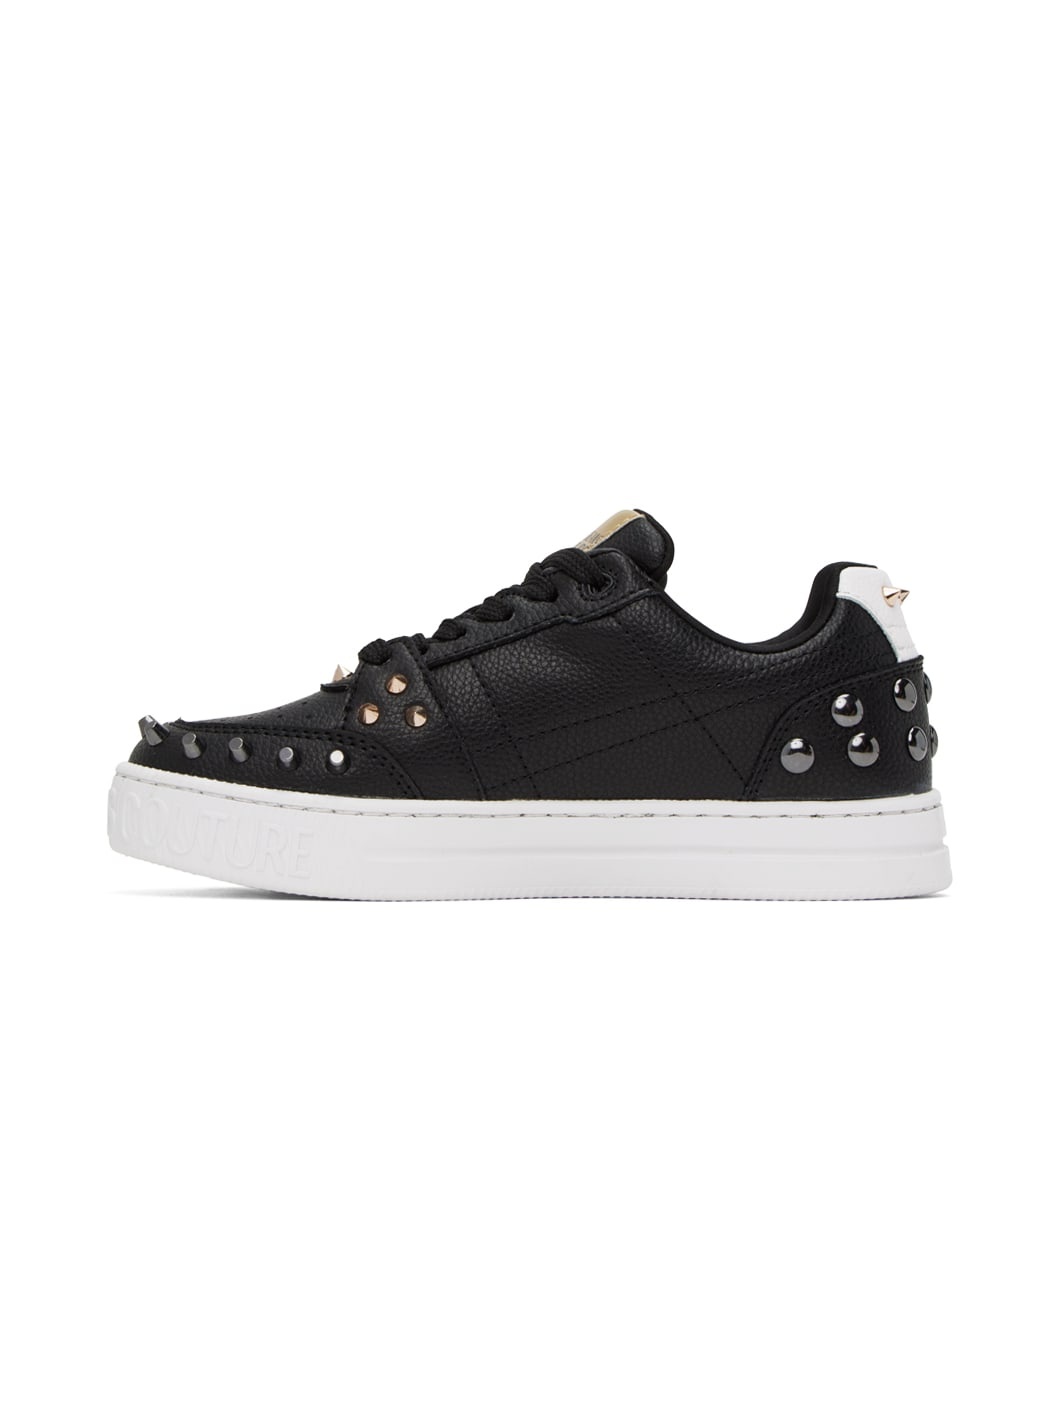 Black Court 88 Spiked Sneakers - 3